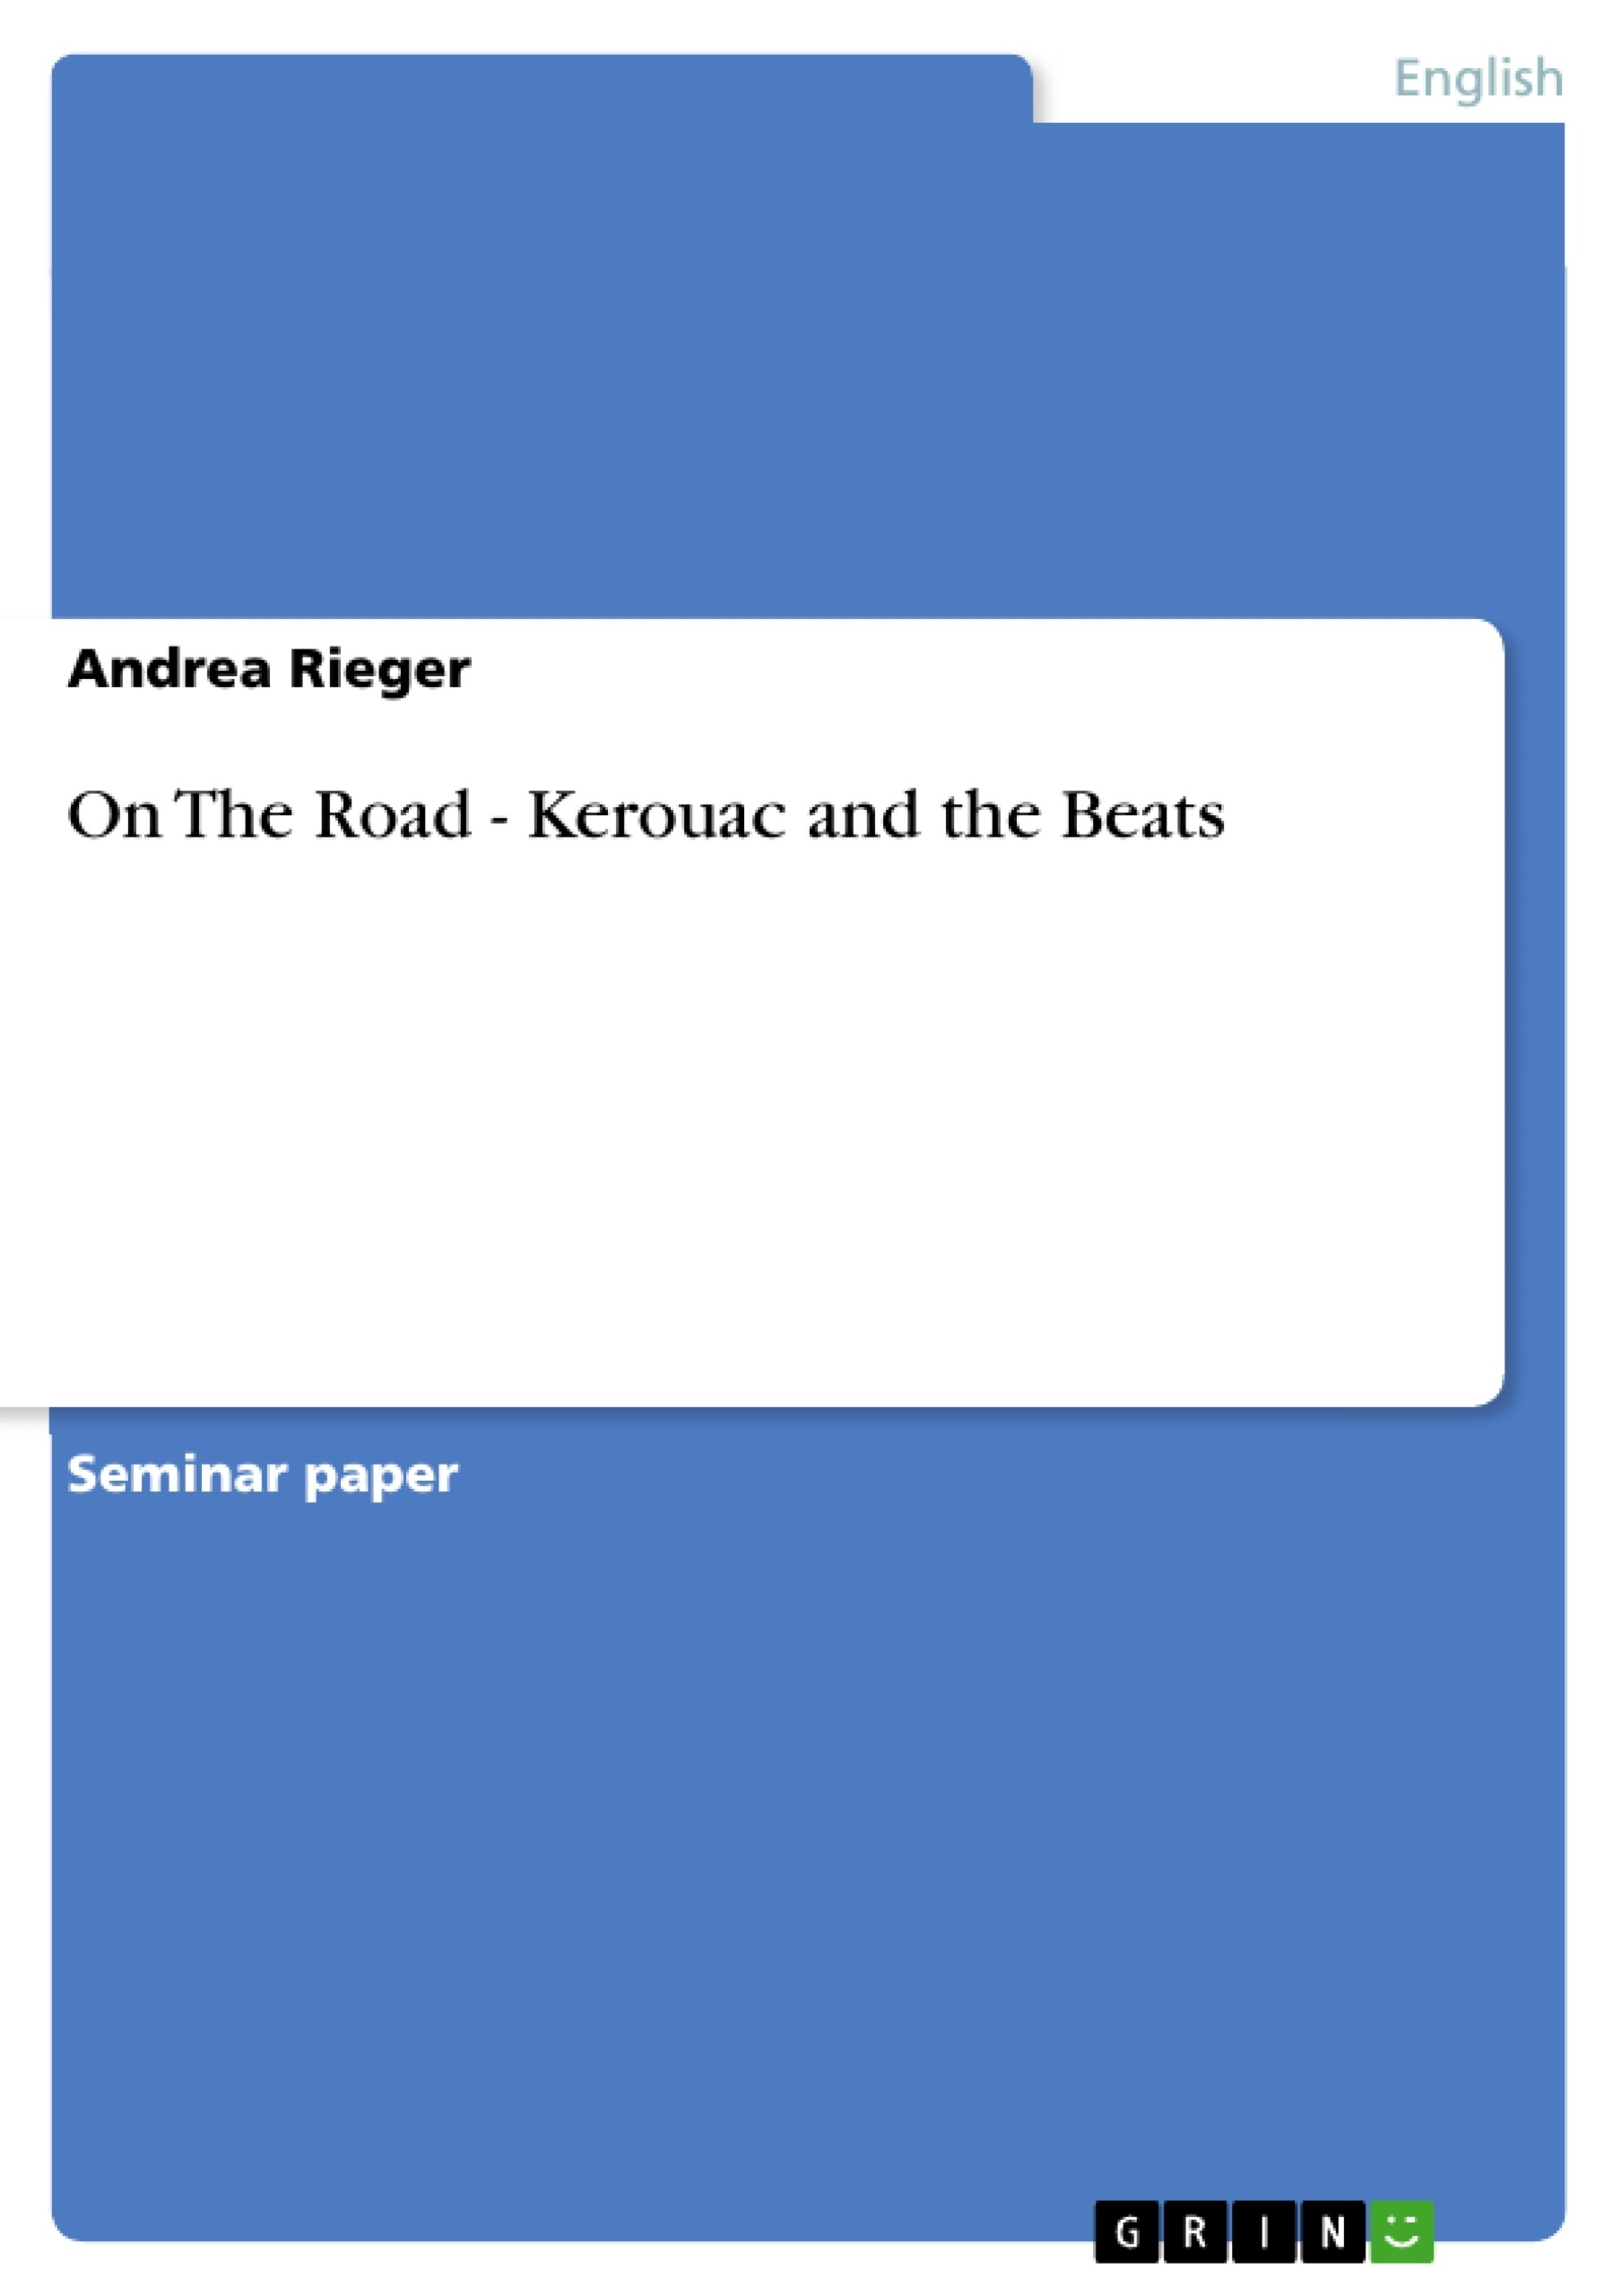 Título: On The Road - Kerouac and the Beats